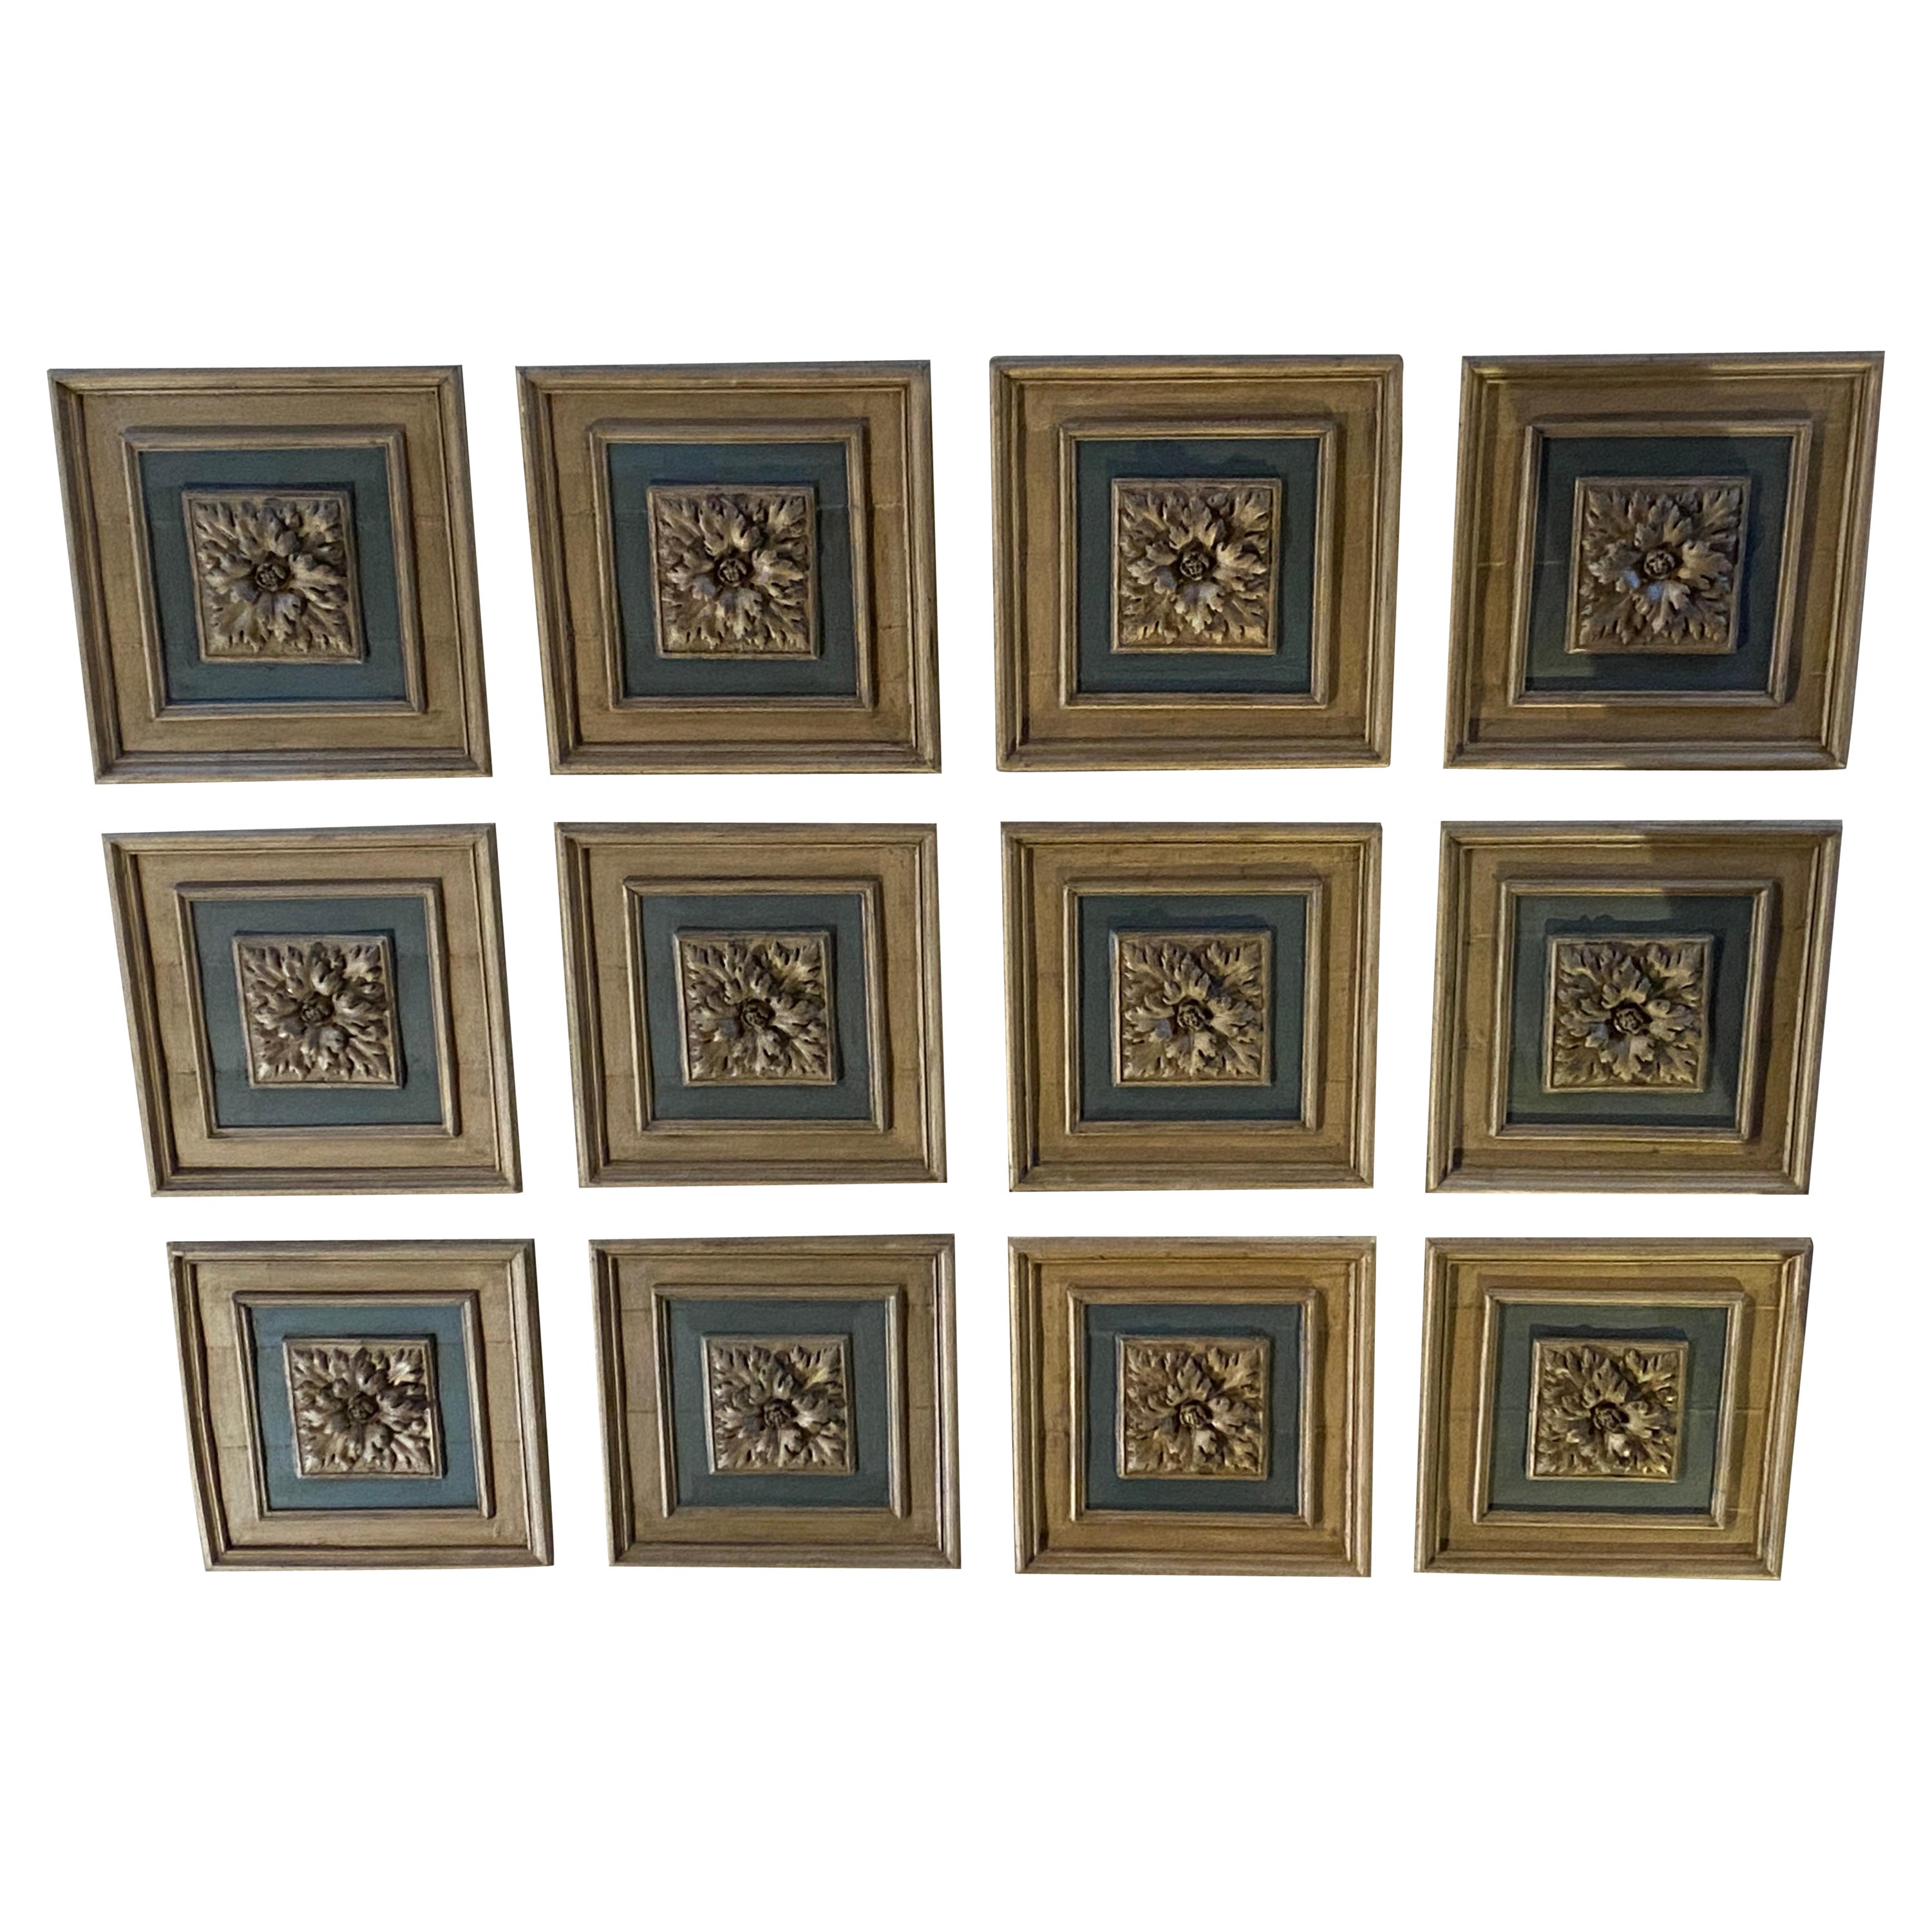 old polychrome wooden coffered ceiling tiles dating from the 19th century